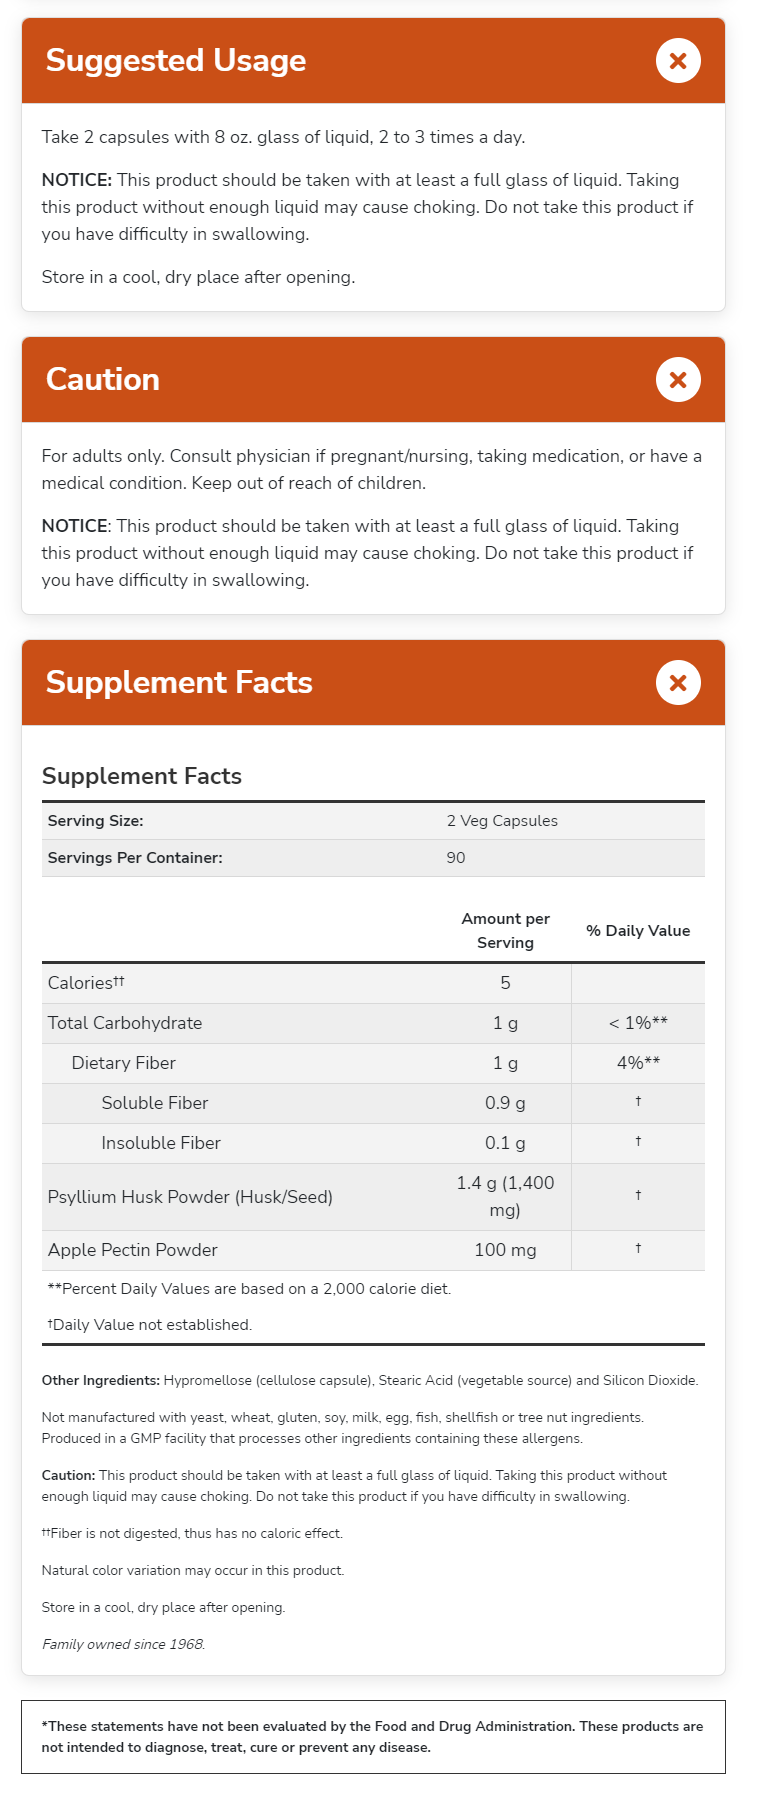 Supplement instructions and facts: Take 2 capsules 2-3 times a day. Requires liquid to avoid choking. Not for those with swallowing difficulty.